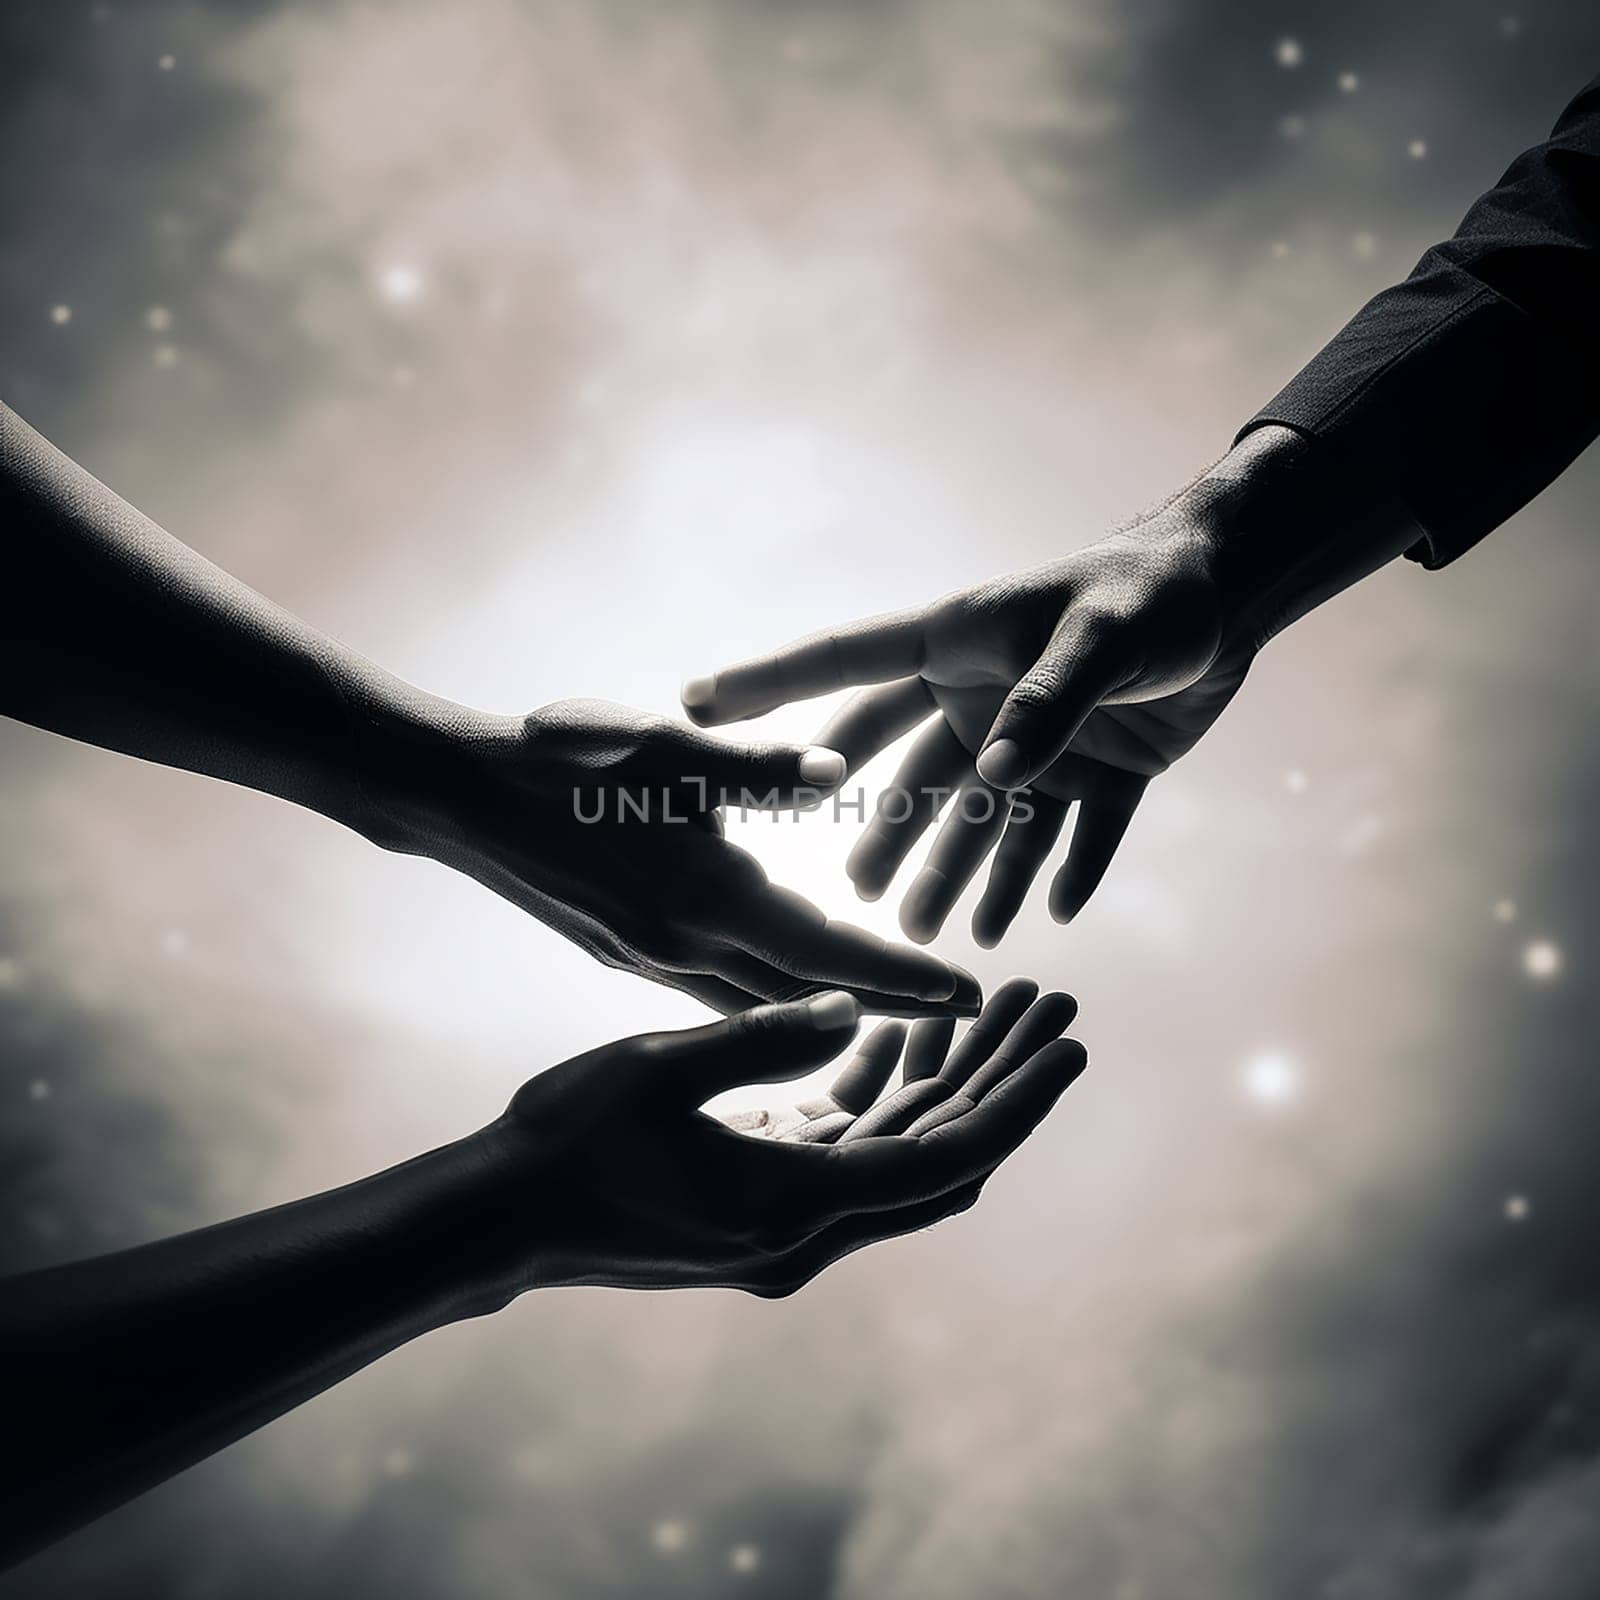 Unity in Darkness: Hands Extending Help in Times of Need by Petrichor